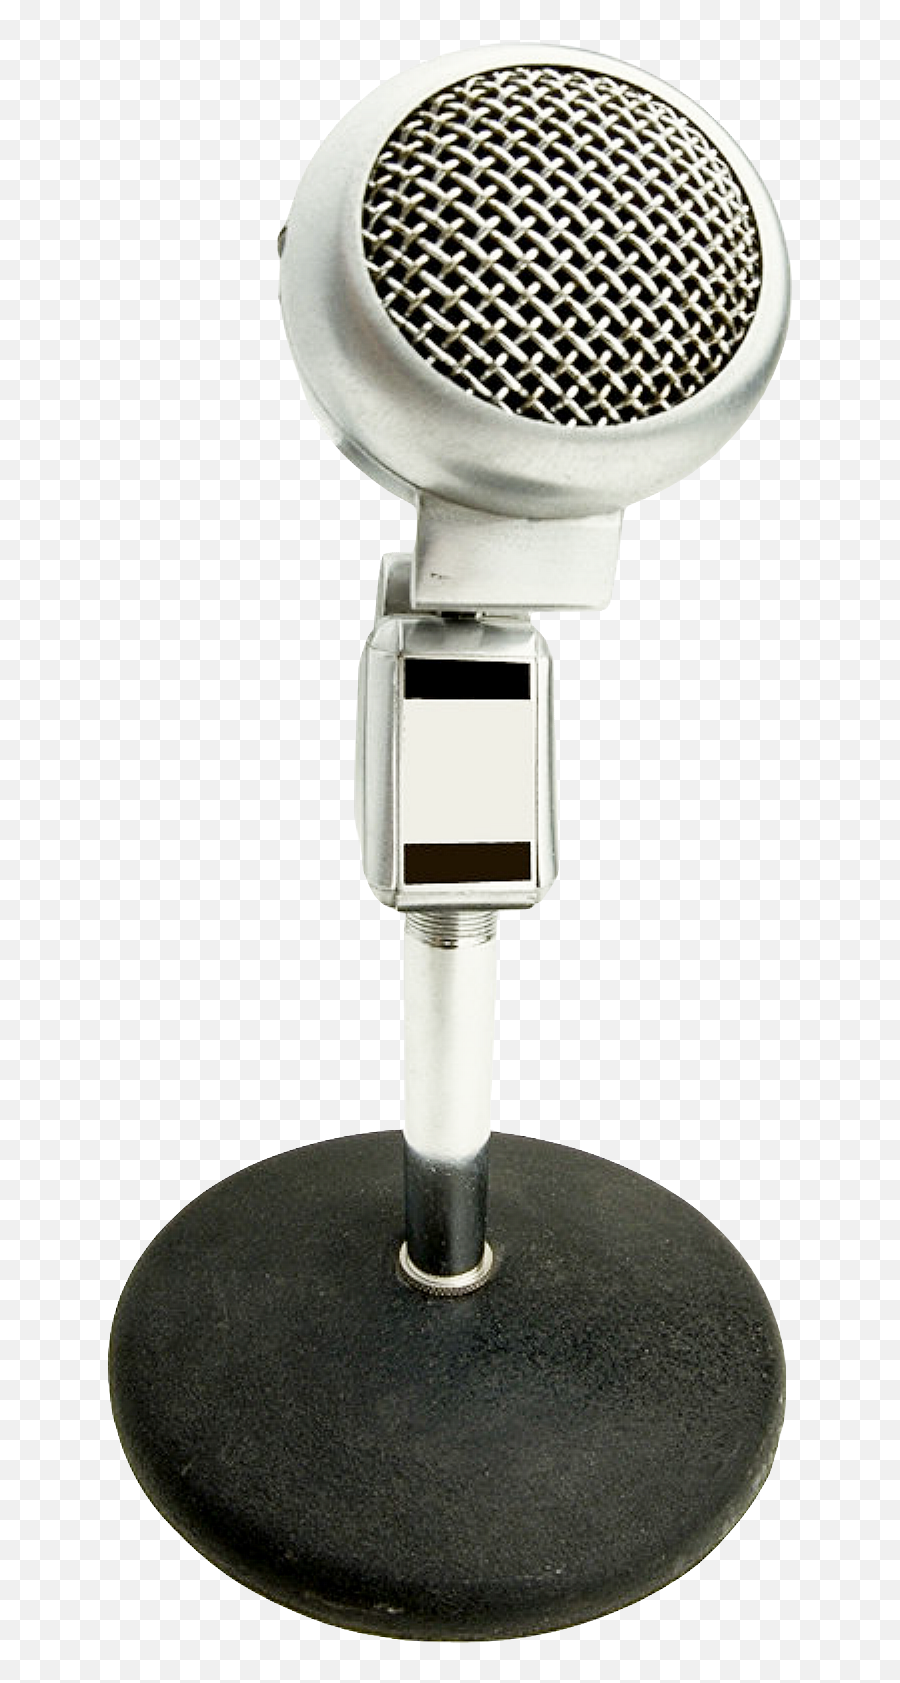 Microphone Png Transparent Microphone Clipart Png Images - Portable Network Graphics Emoji,Microphone Transparent Background